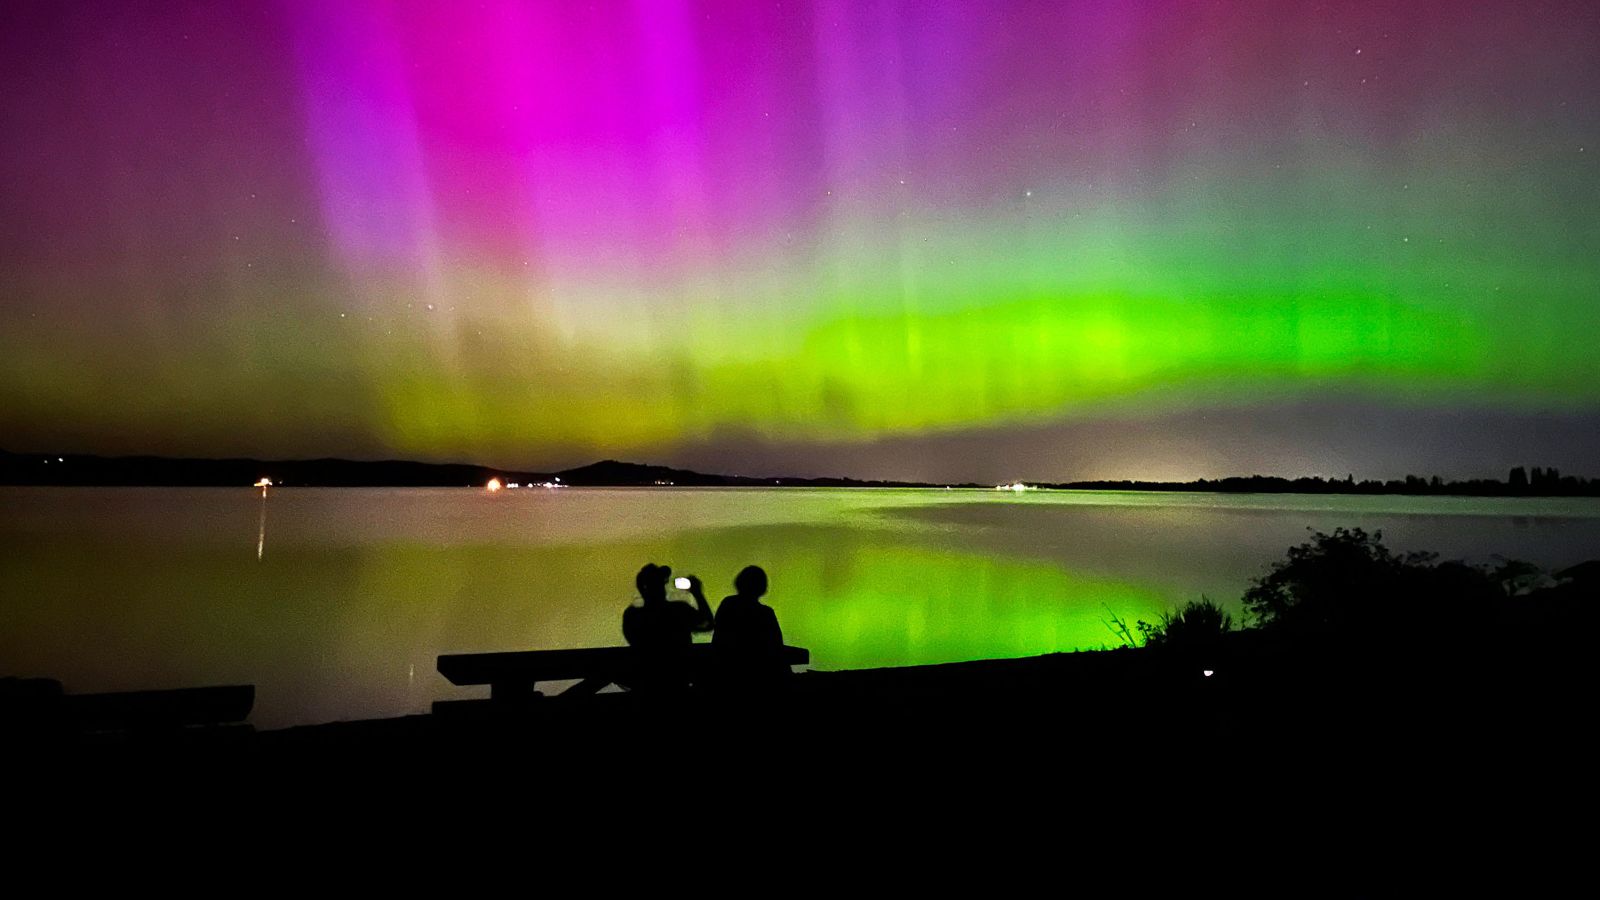 Have you missed the dazzling spectacle of the northern lights?  Maybe she'll get another chance this Saturday night